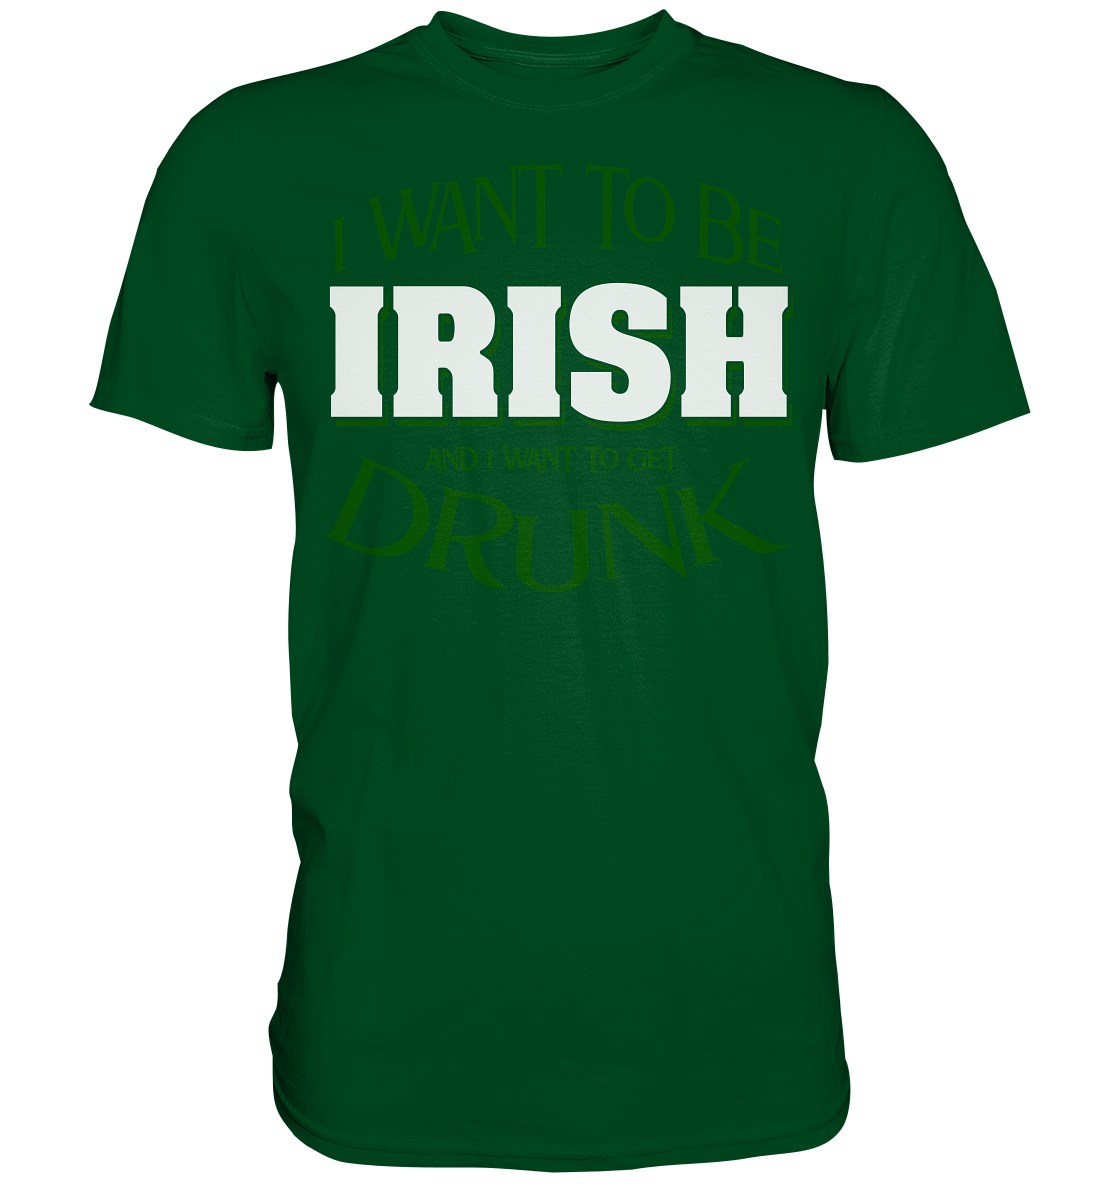 I Want To Be Irish And I Want To Get Drunk - Premium Shirt